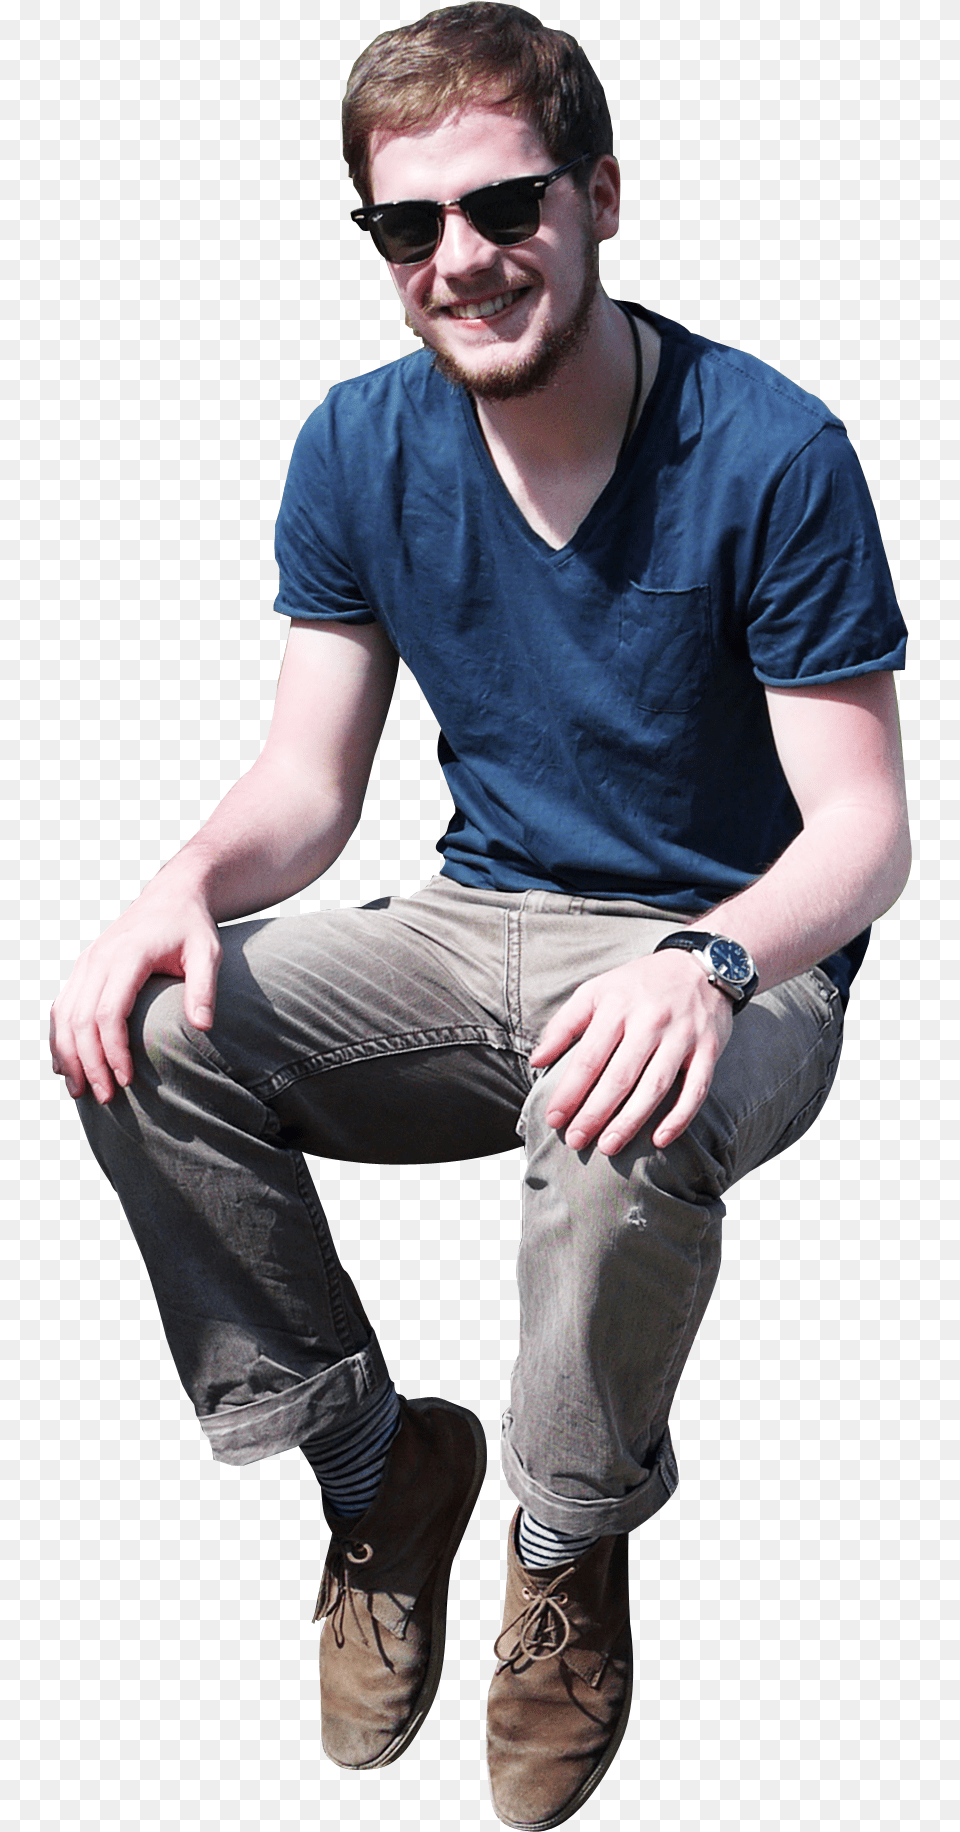 Photoshop People Sitting People Sitting Transparent, Accessories, Shoe, Pants, Jeans Png Image